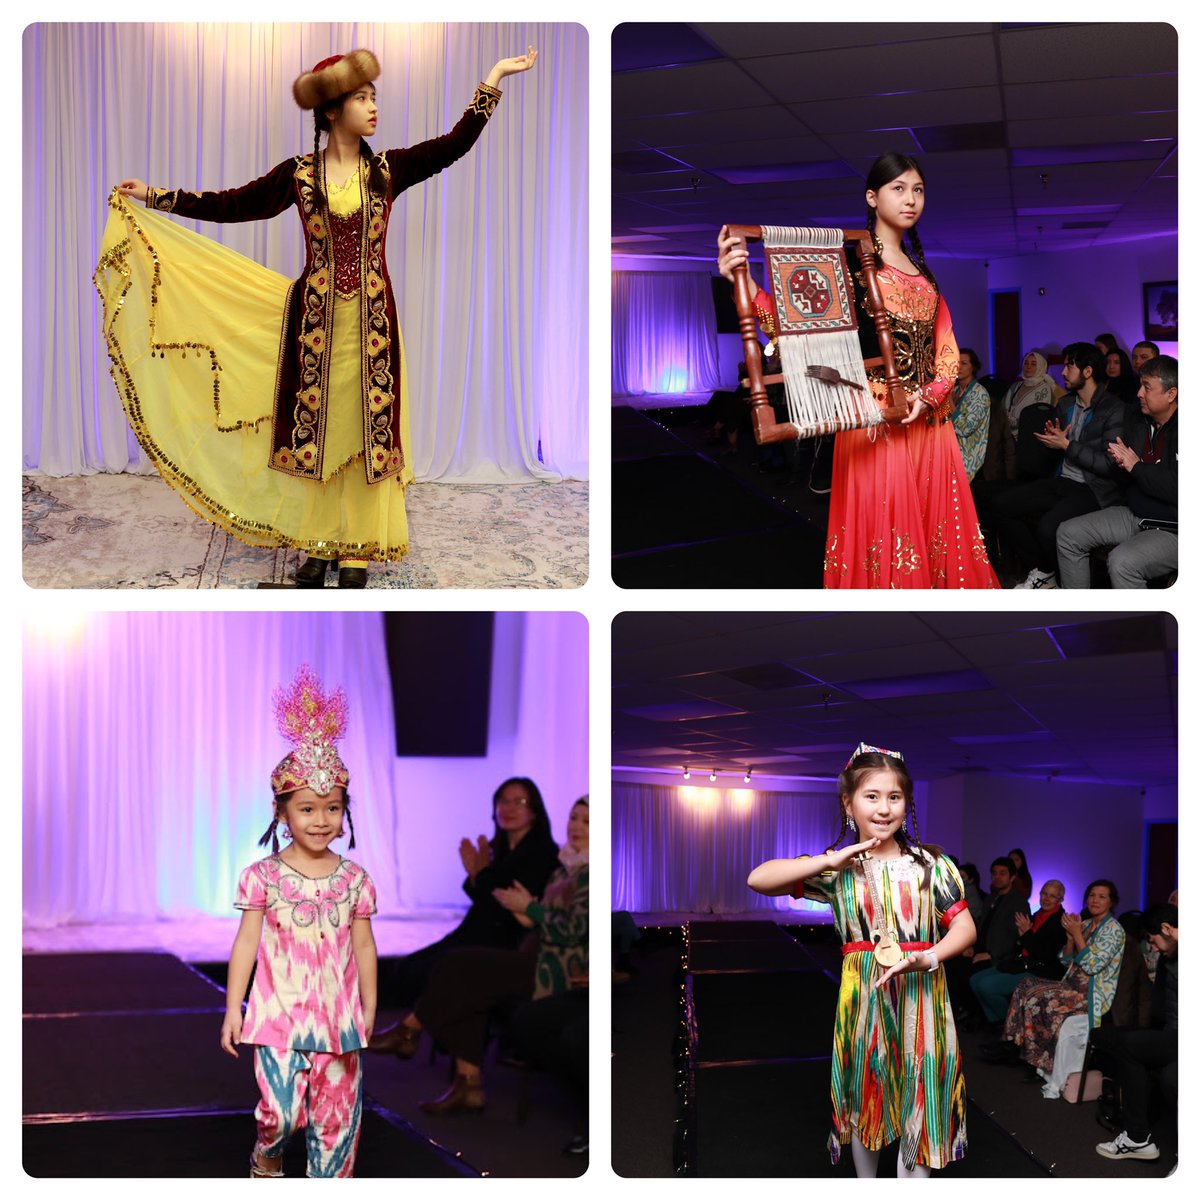 UAA held a Uyghur Fashion show at the Uyghur Center. Did you know that more than 100 fashion brands in the apparel industry are linked to Uyghur Forced labor. Our kids will preserve our traditions & keep alive our culture that the CCP is trying to destroy! 
#EndUyghurForcedLabor